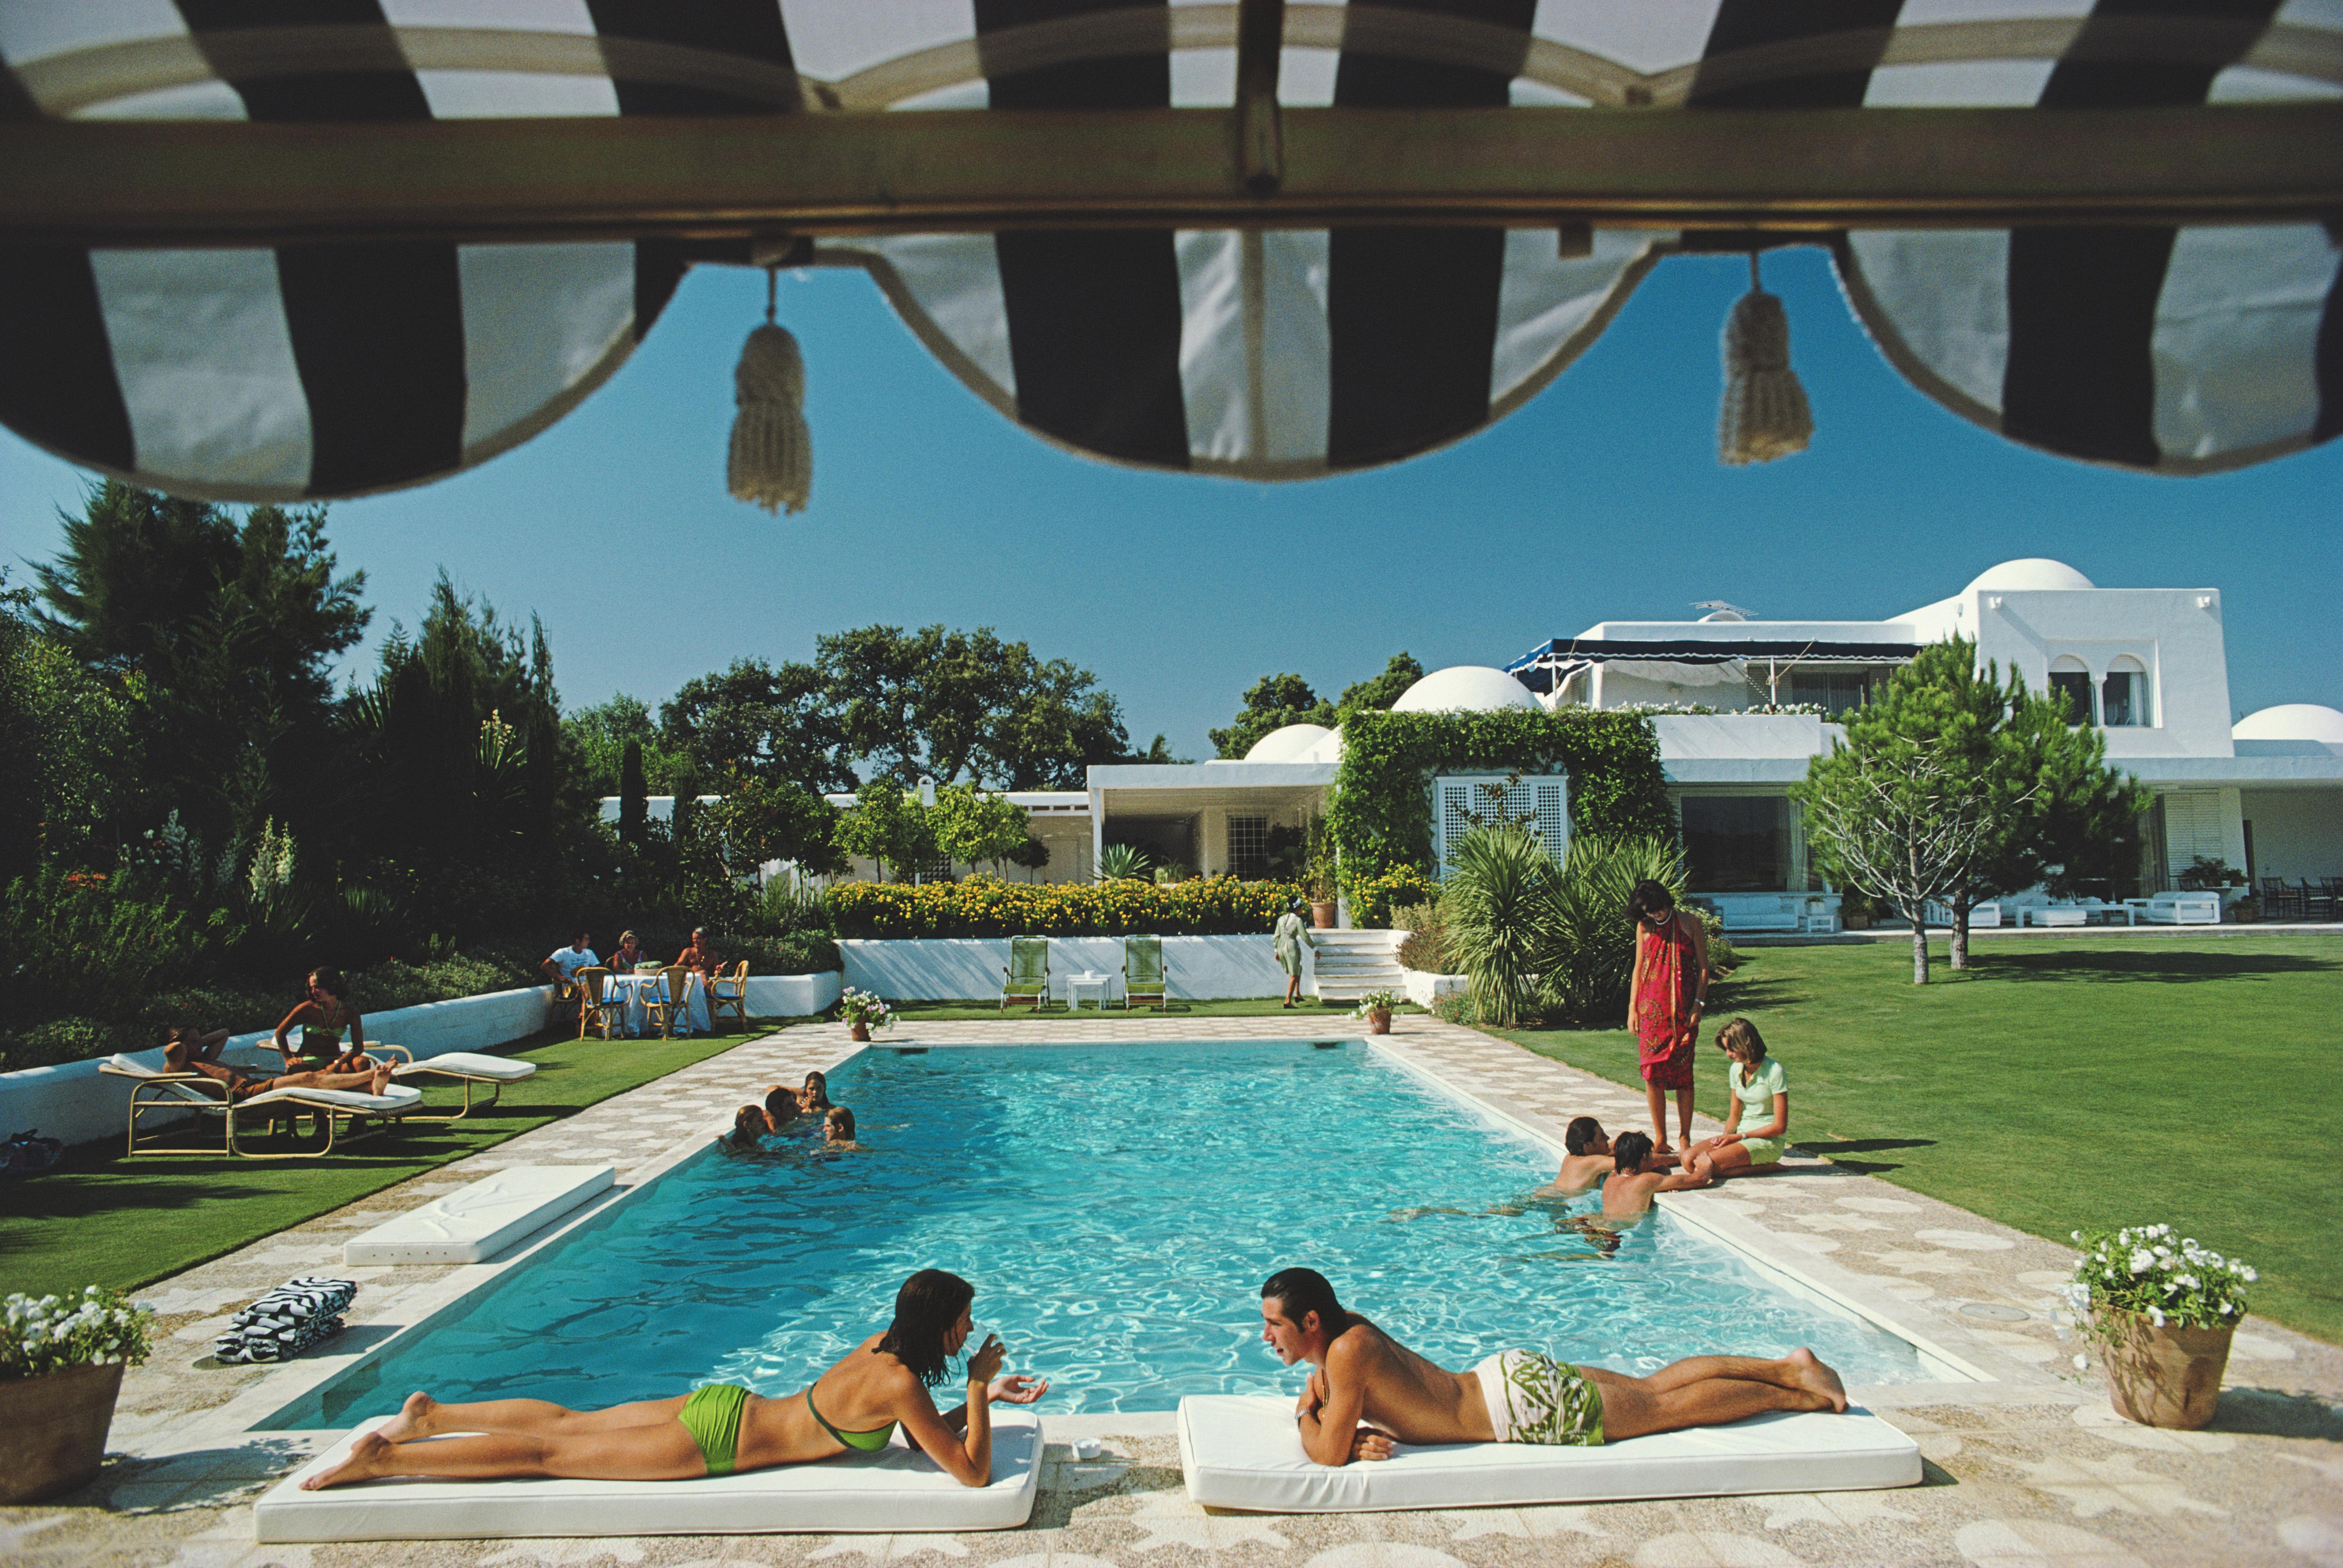 'Poolside In Sotogrande' 1975 Slim Aarons Limited Estate Edition

Bathers round a pool in Sotogrande, Spain, August 1975. 

Produced from the original transparency
Certificate of authenticity supplied 
30x40 inches / 76 x 101.6 cm paper size